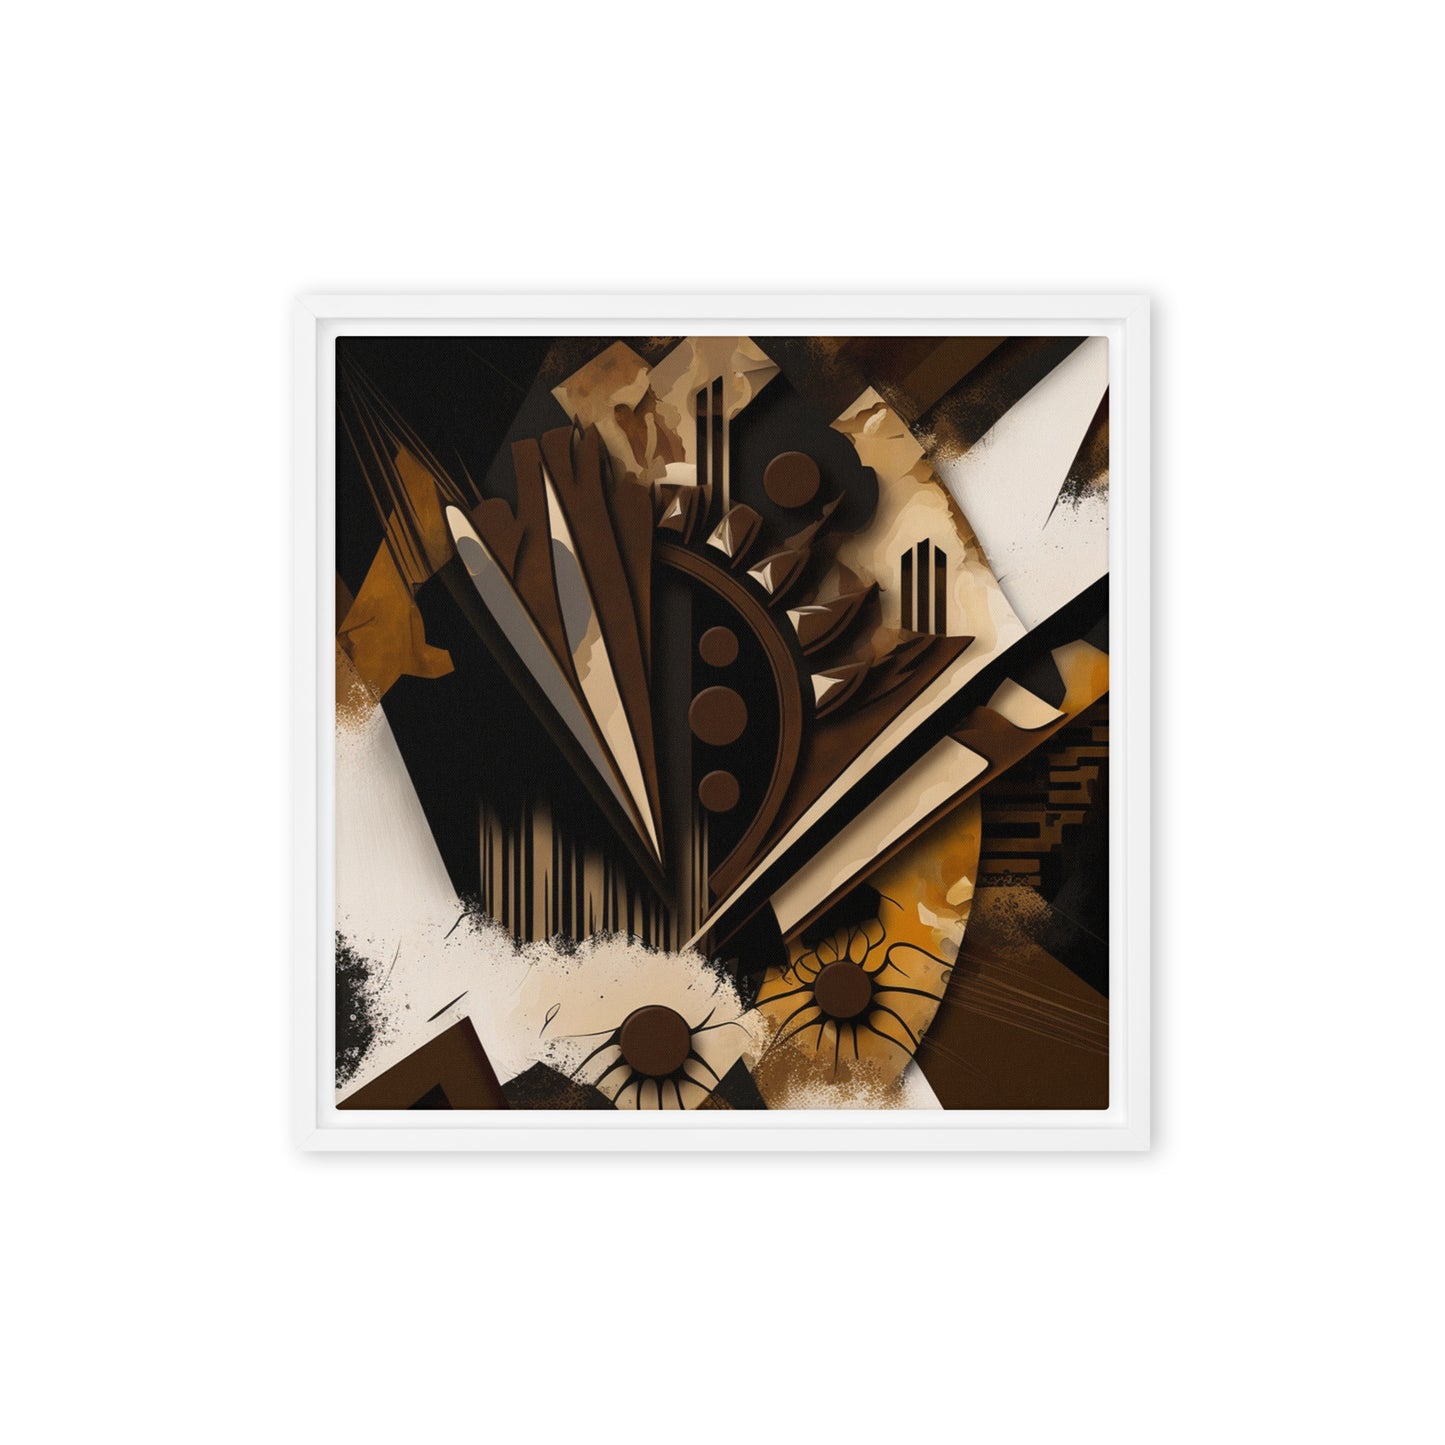 'RESILIENCE' abstract African design: Framed canvas art